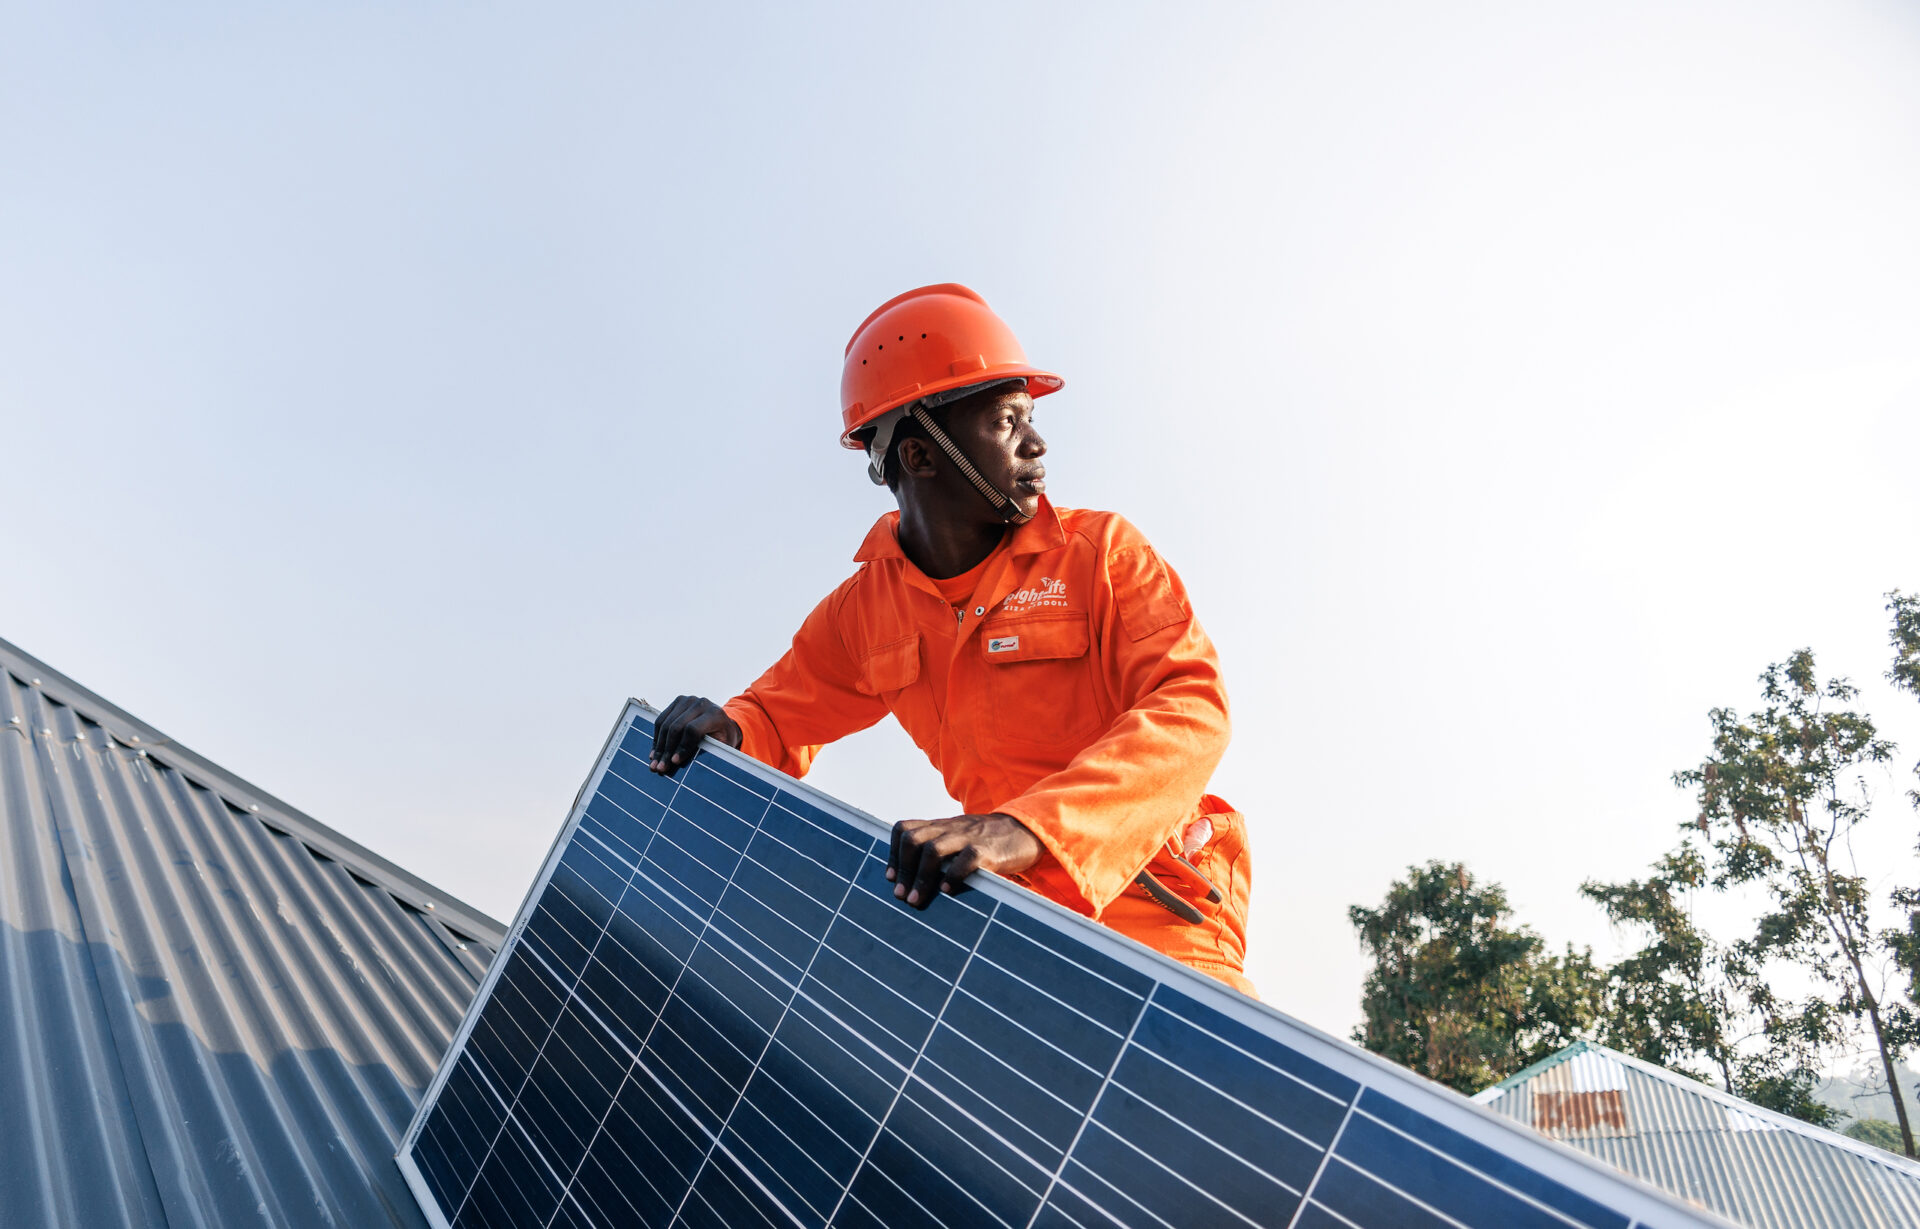 Amped Innovation worker wearing hi-viz orange branded jumpsuit and matching hardhat holding solar panel during rooftop installation, looking into the distance.